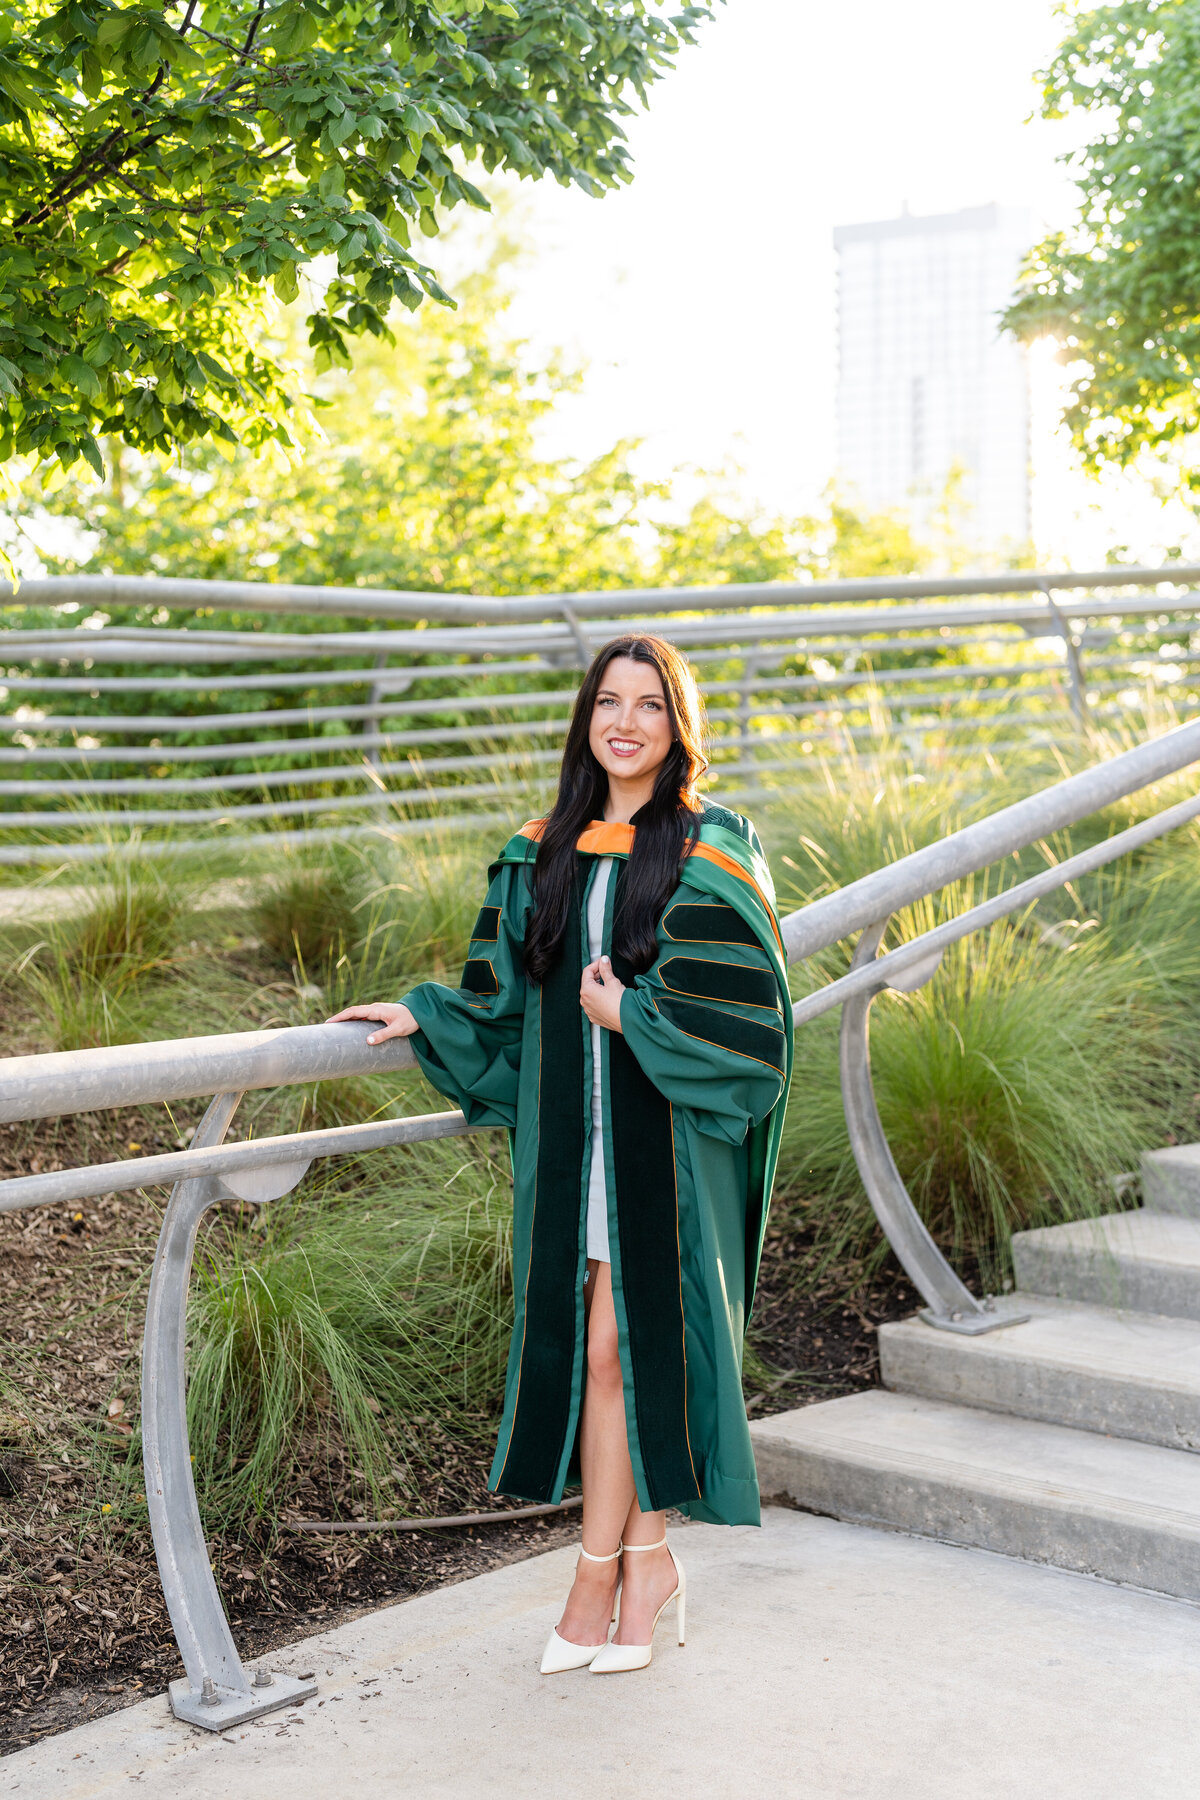 Baylor senior girl wearing doctorate gown and hood while holding gown and hand on railing and smiling in Downtown Houston